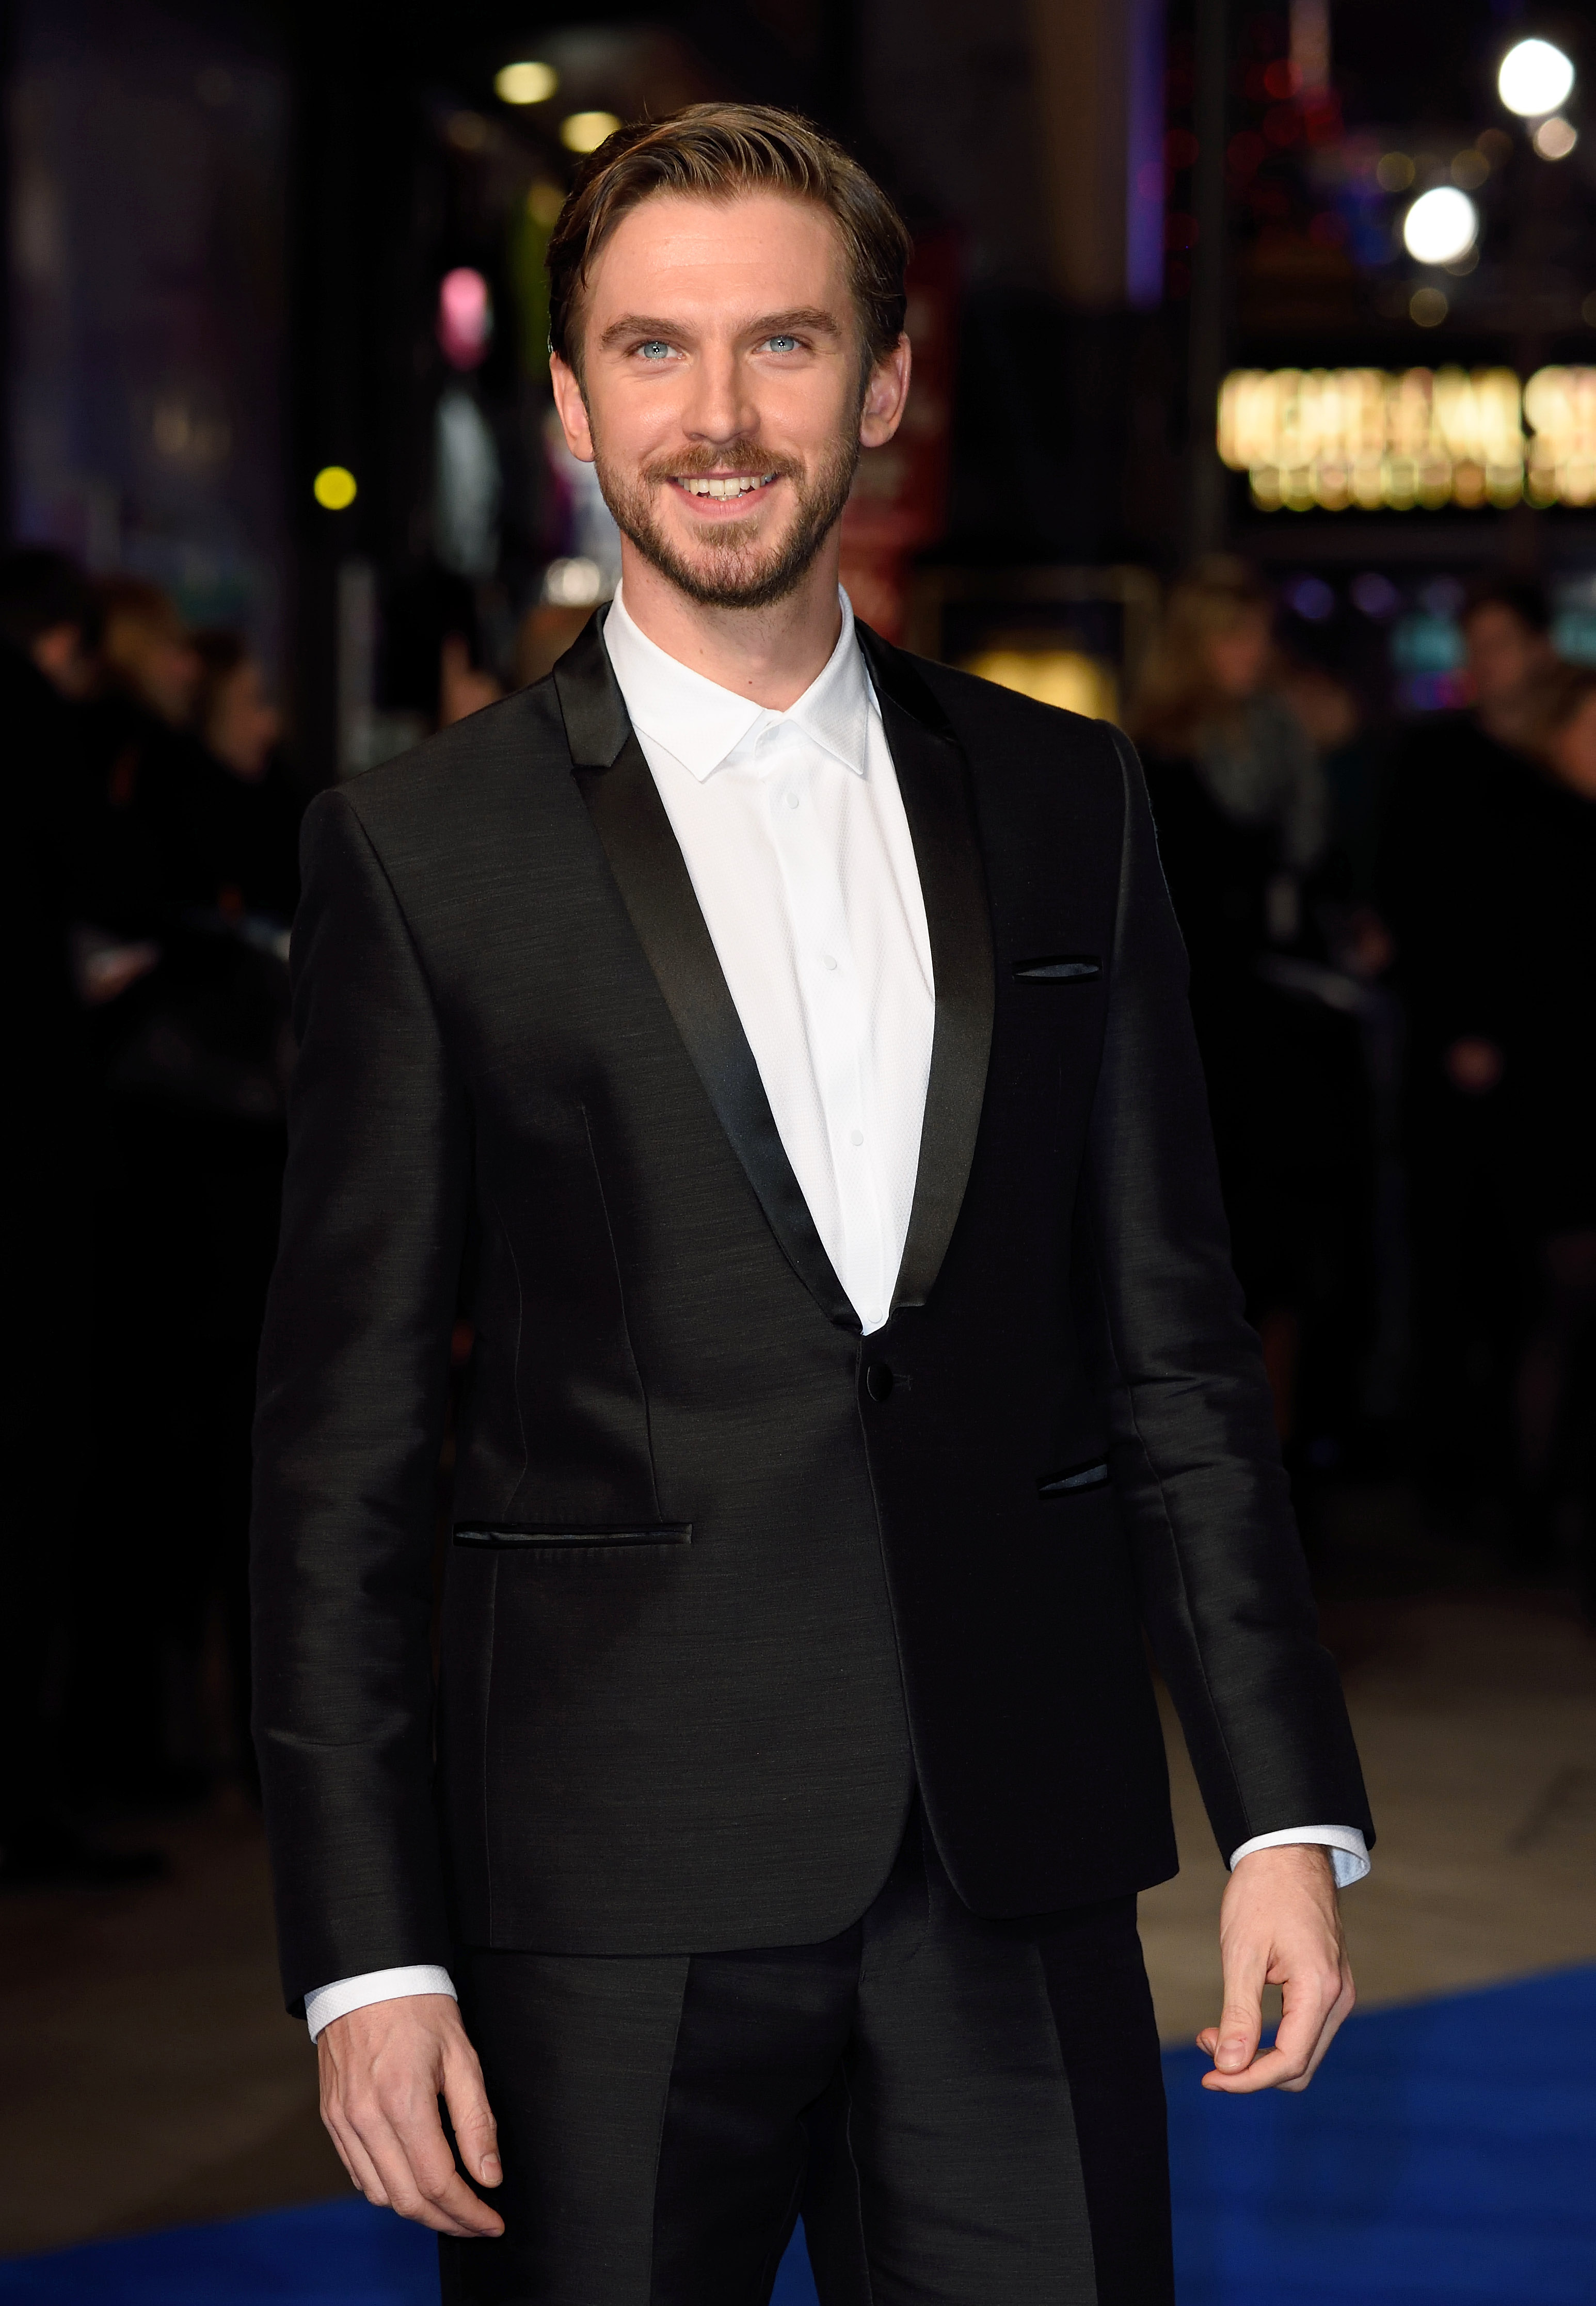 Dan Stevens attends the UK Premiere of "Night At The Museum: Secret Of The Tomb" at Empire Leicester Square on December 15, 2014 in London, England. (Karwai Tang&mdash;WireImage)